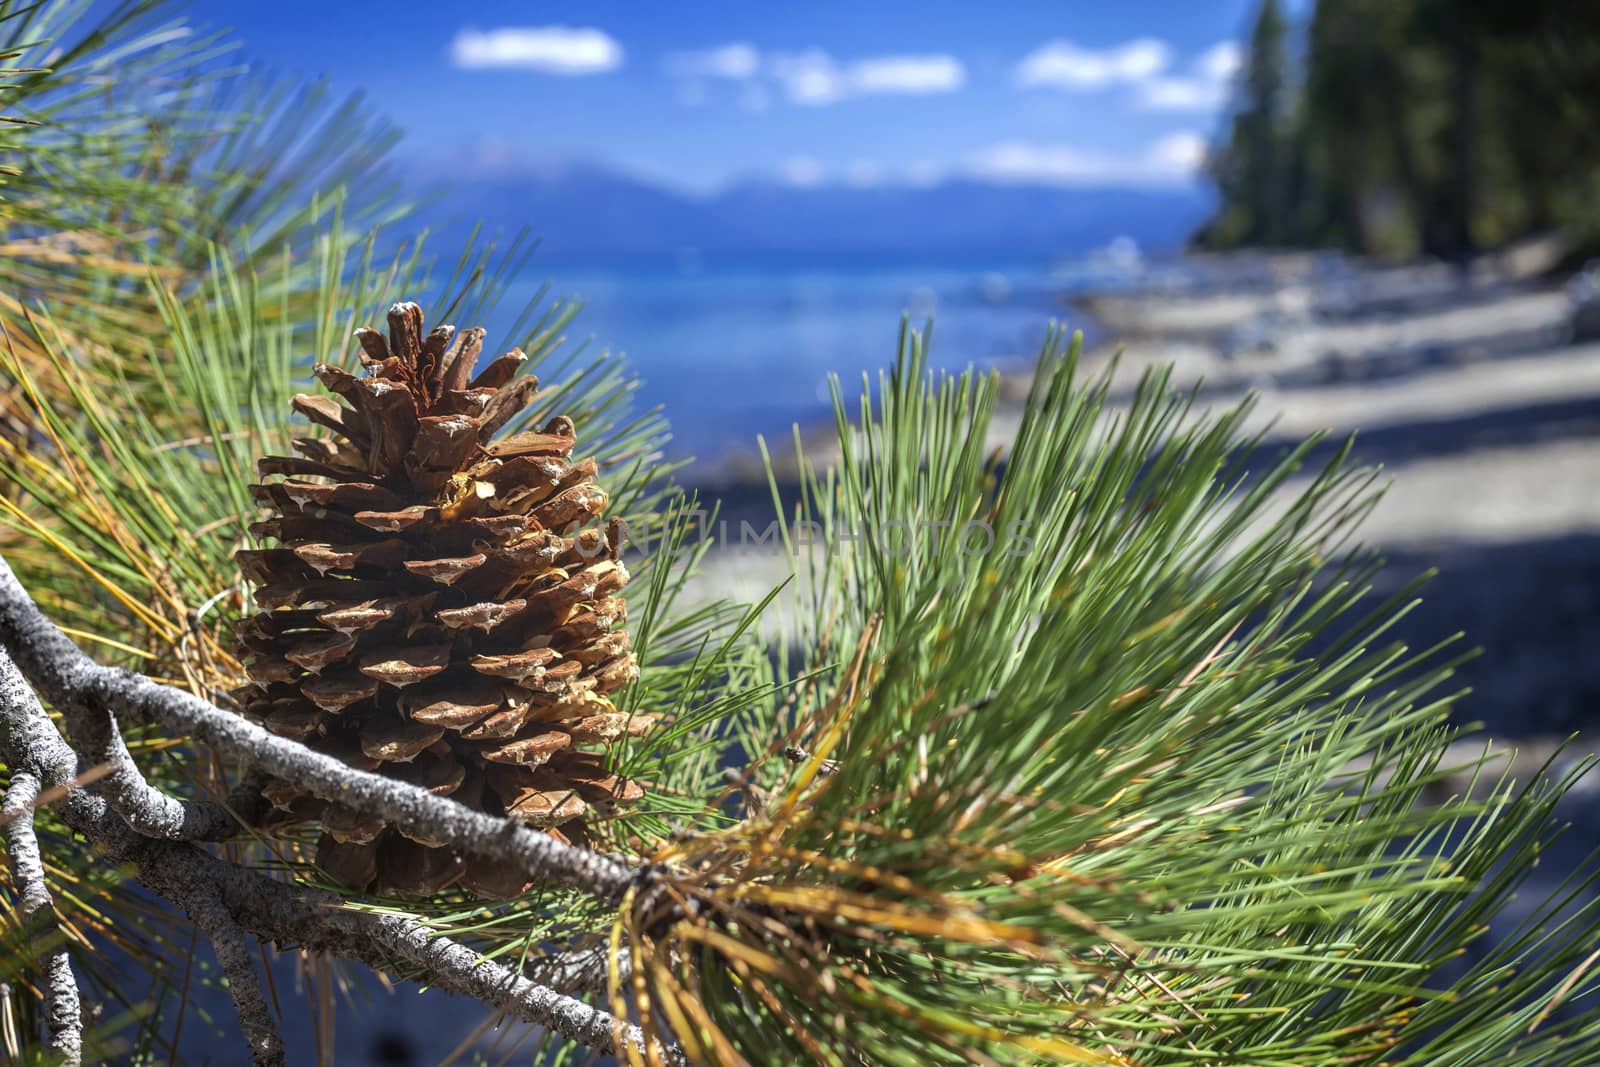 Pine cone isolated with Lake Tahoe in the background. The image is looking South toward South Lake Tahoe, California.